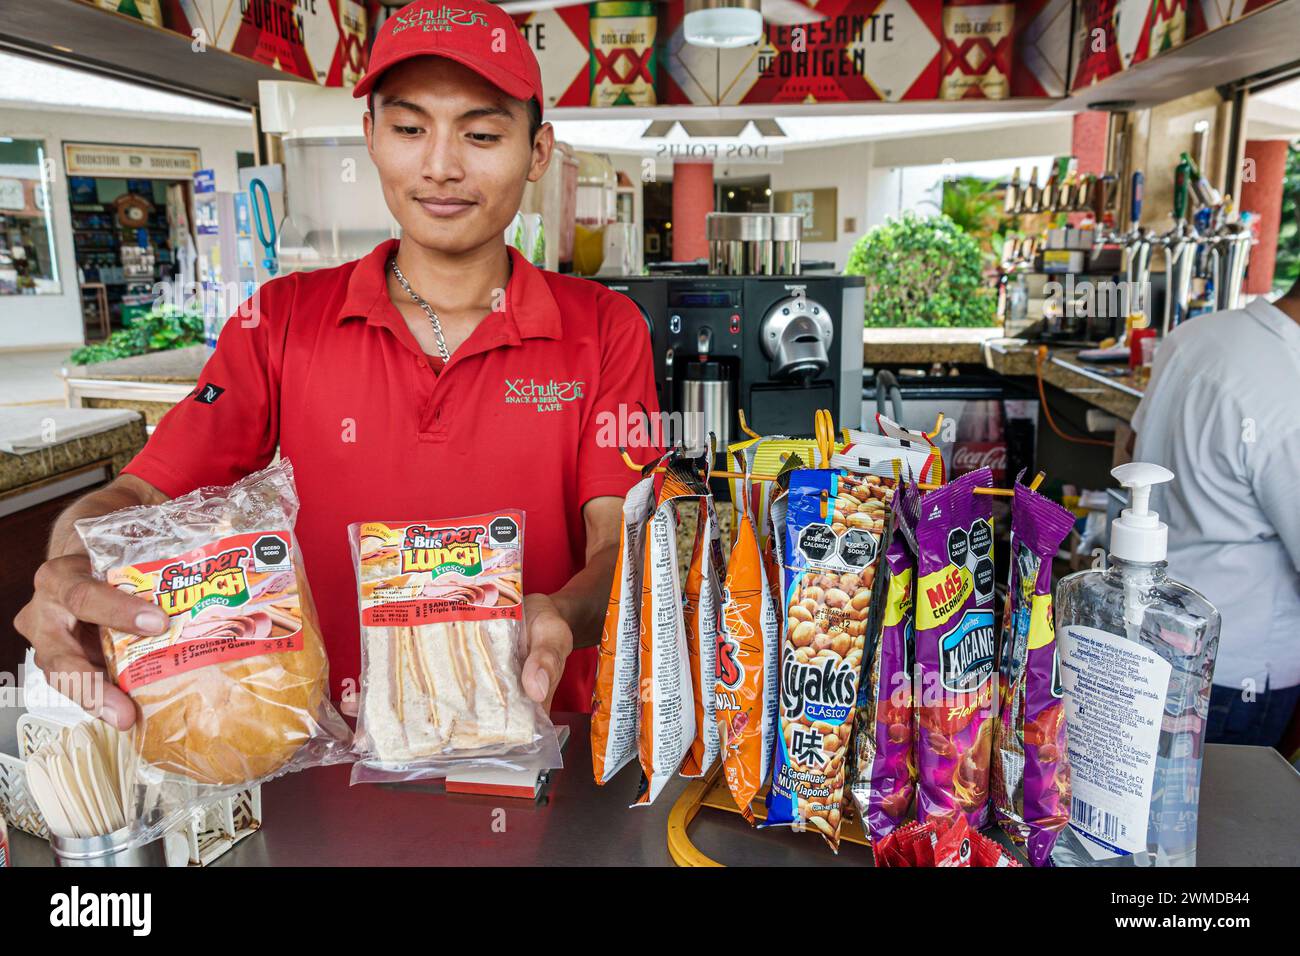 Merida Mexico,Uxmal snacks drinks vendor,offering ready-to-eat packaged sandwiches,teen teenage teenager,adolescent teens teenagers youths adolescents Stock Photo